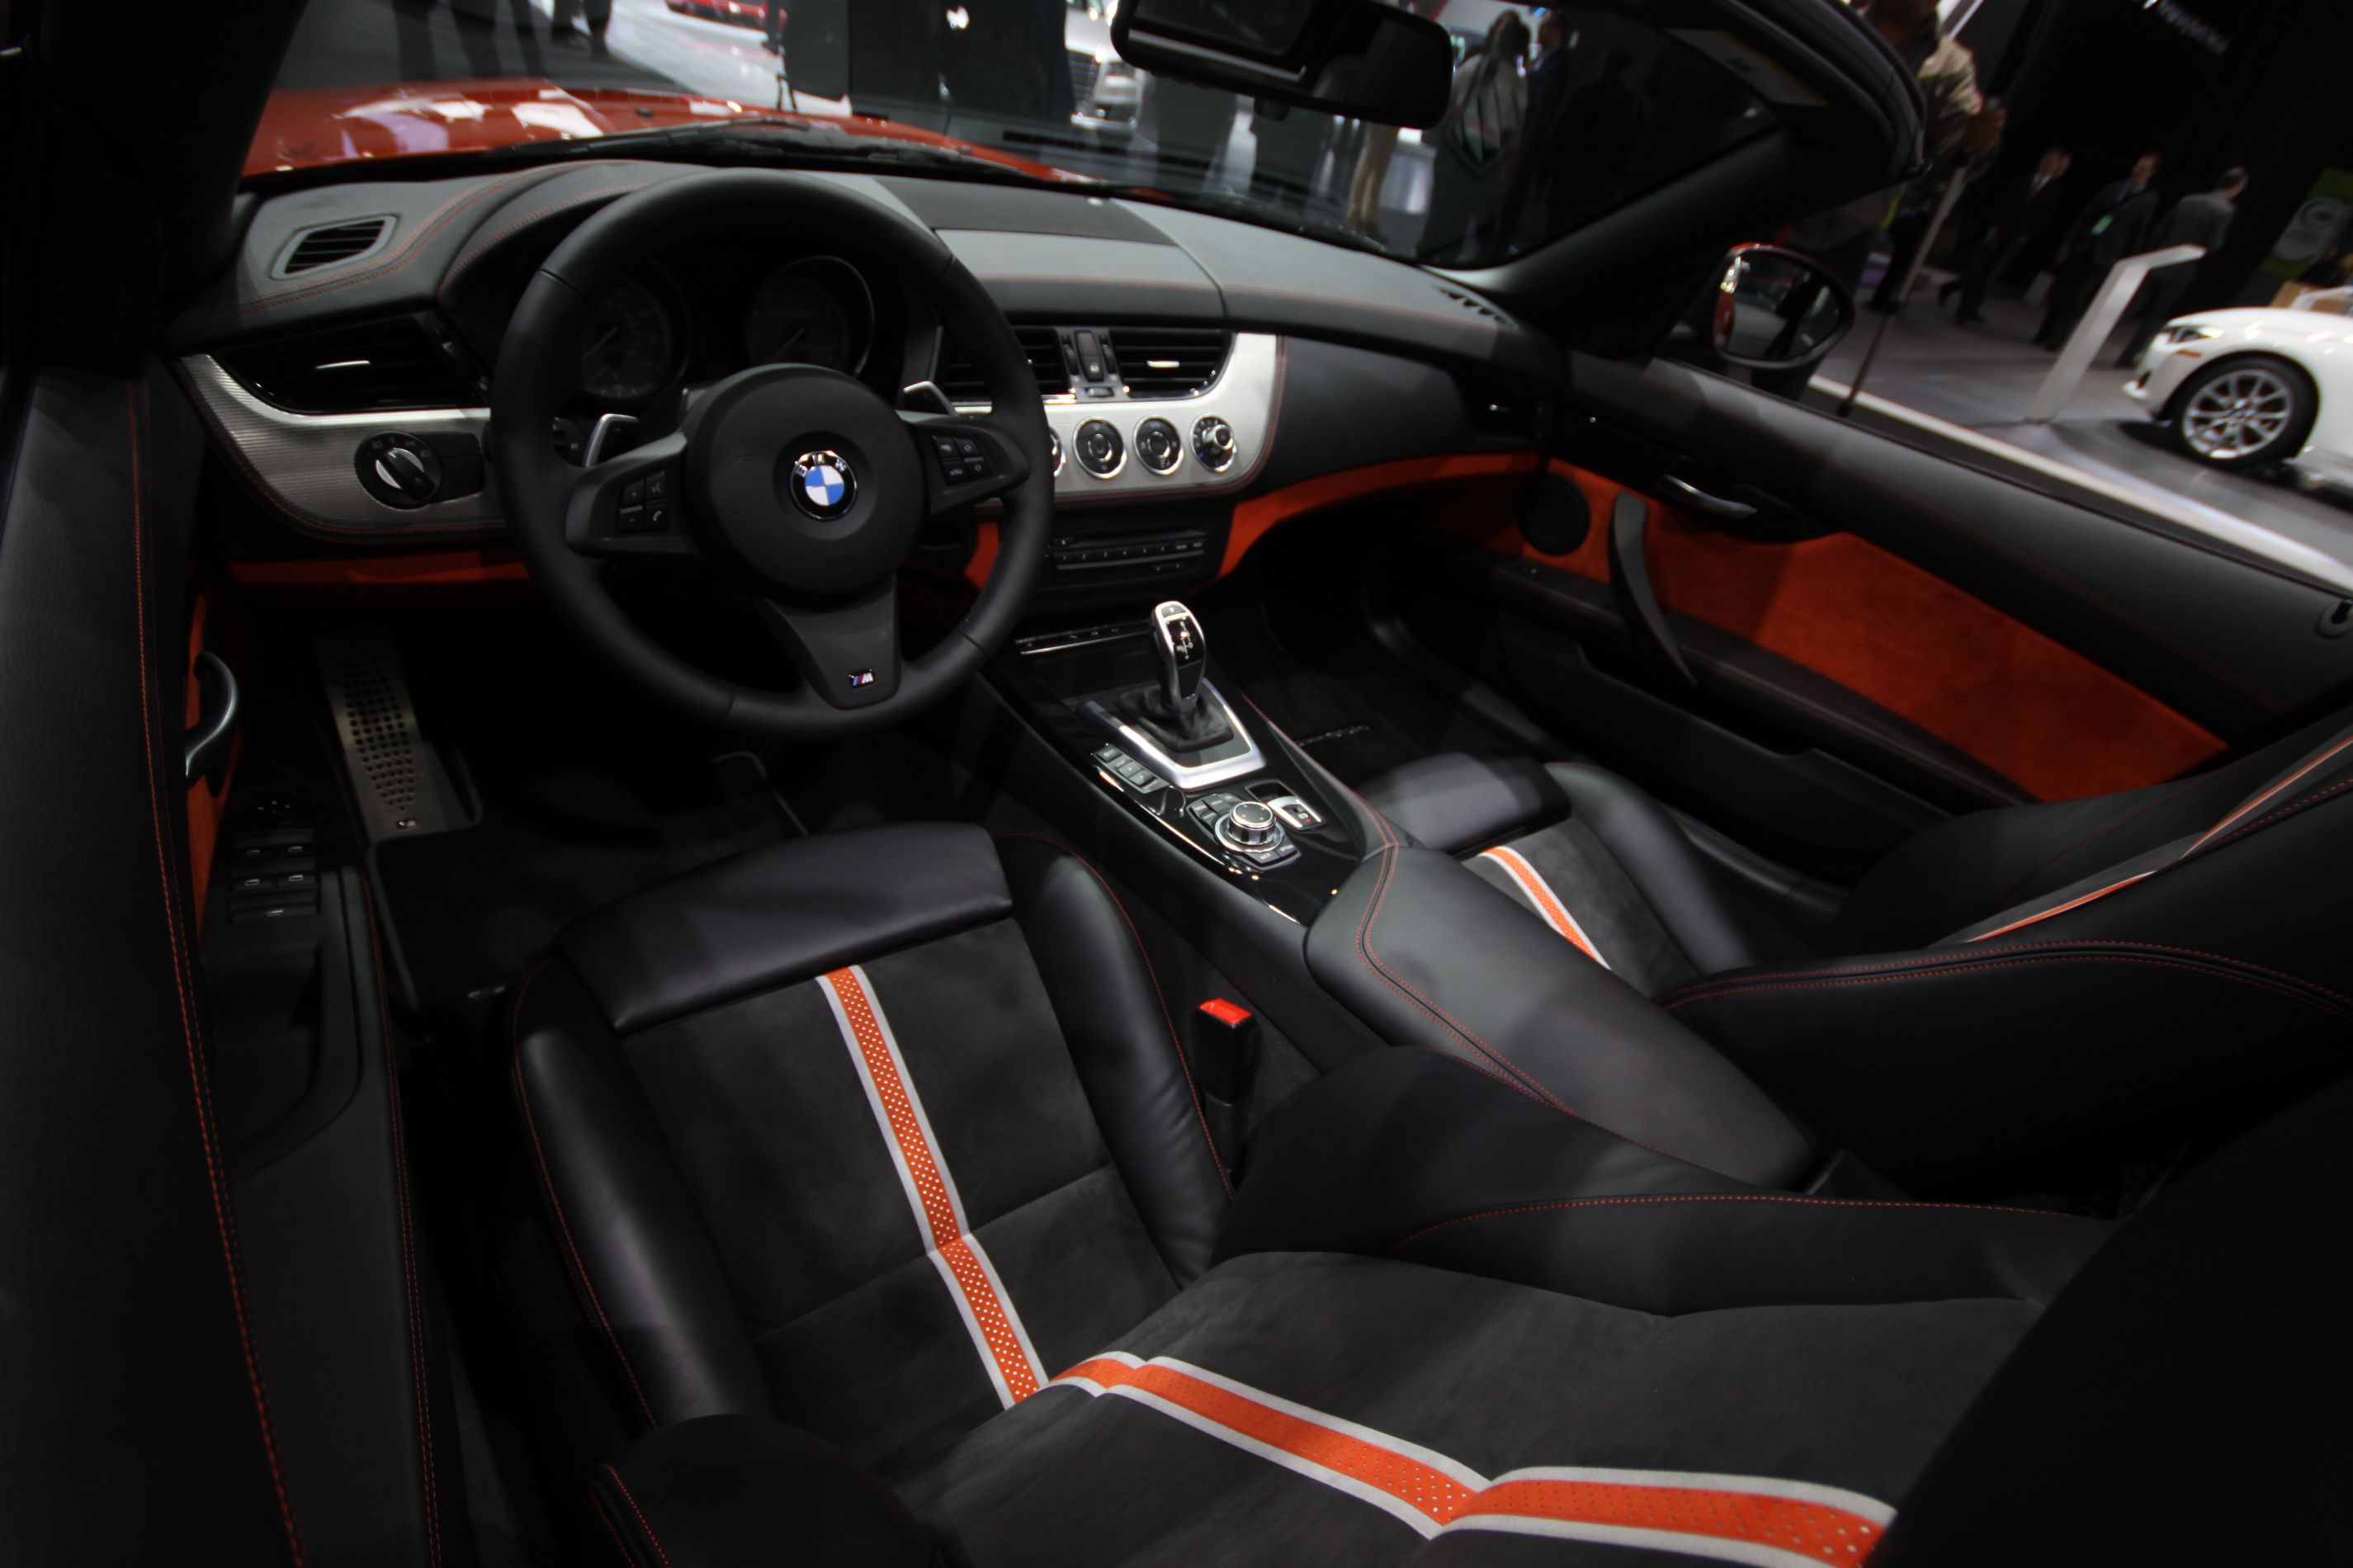 BMW Z4 sDrive 35is | Flickr - Photo Sharing!